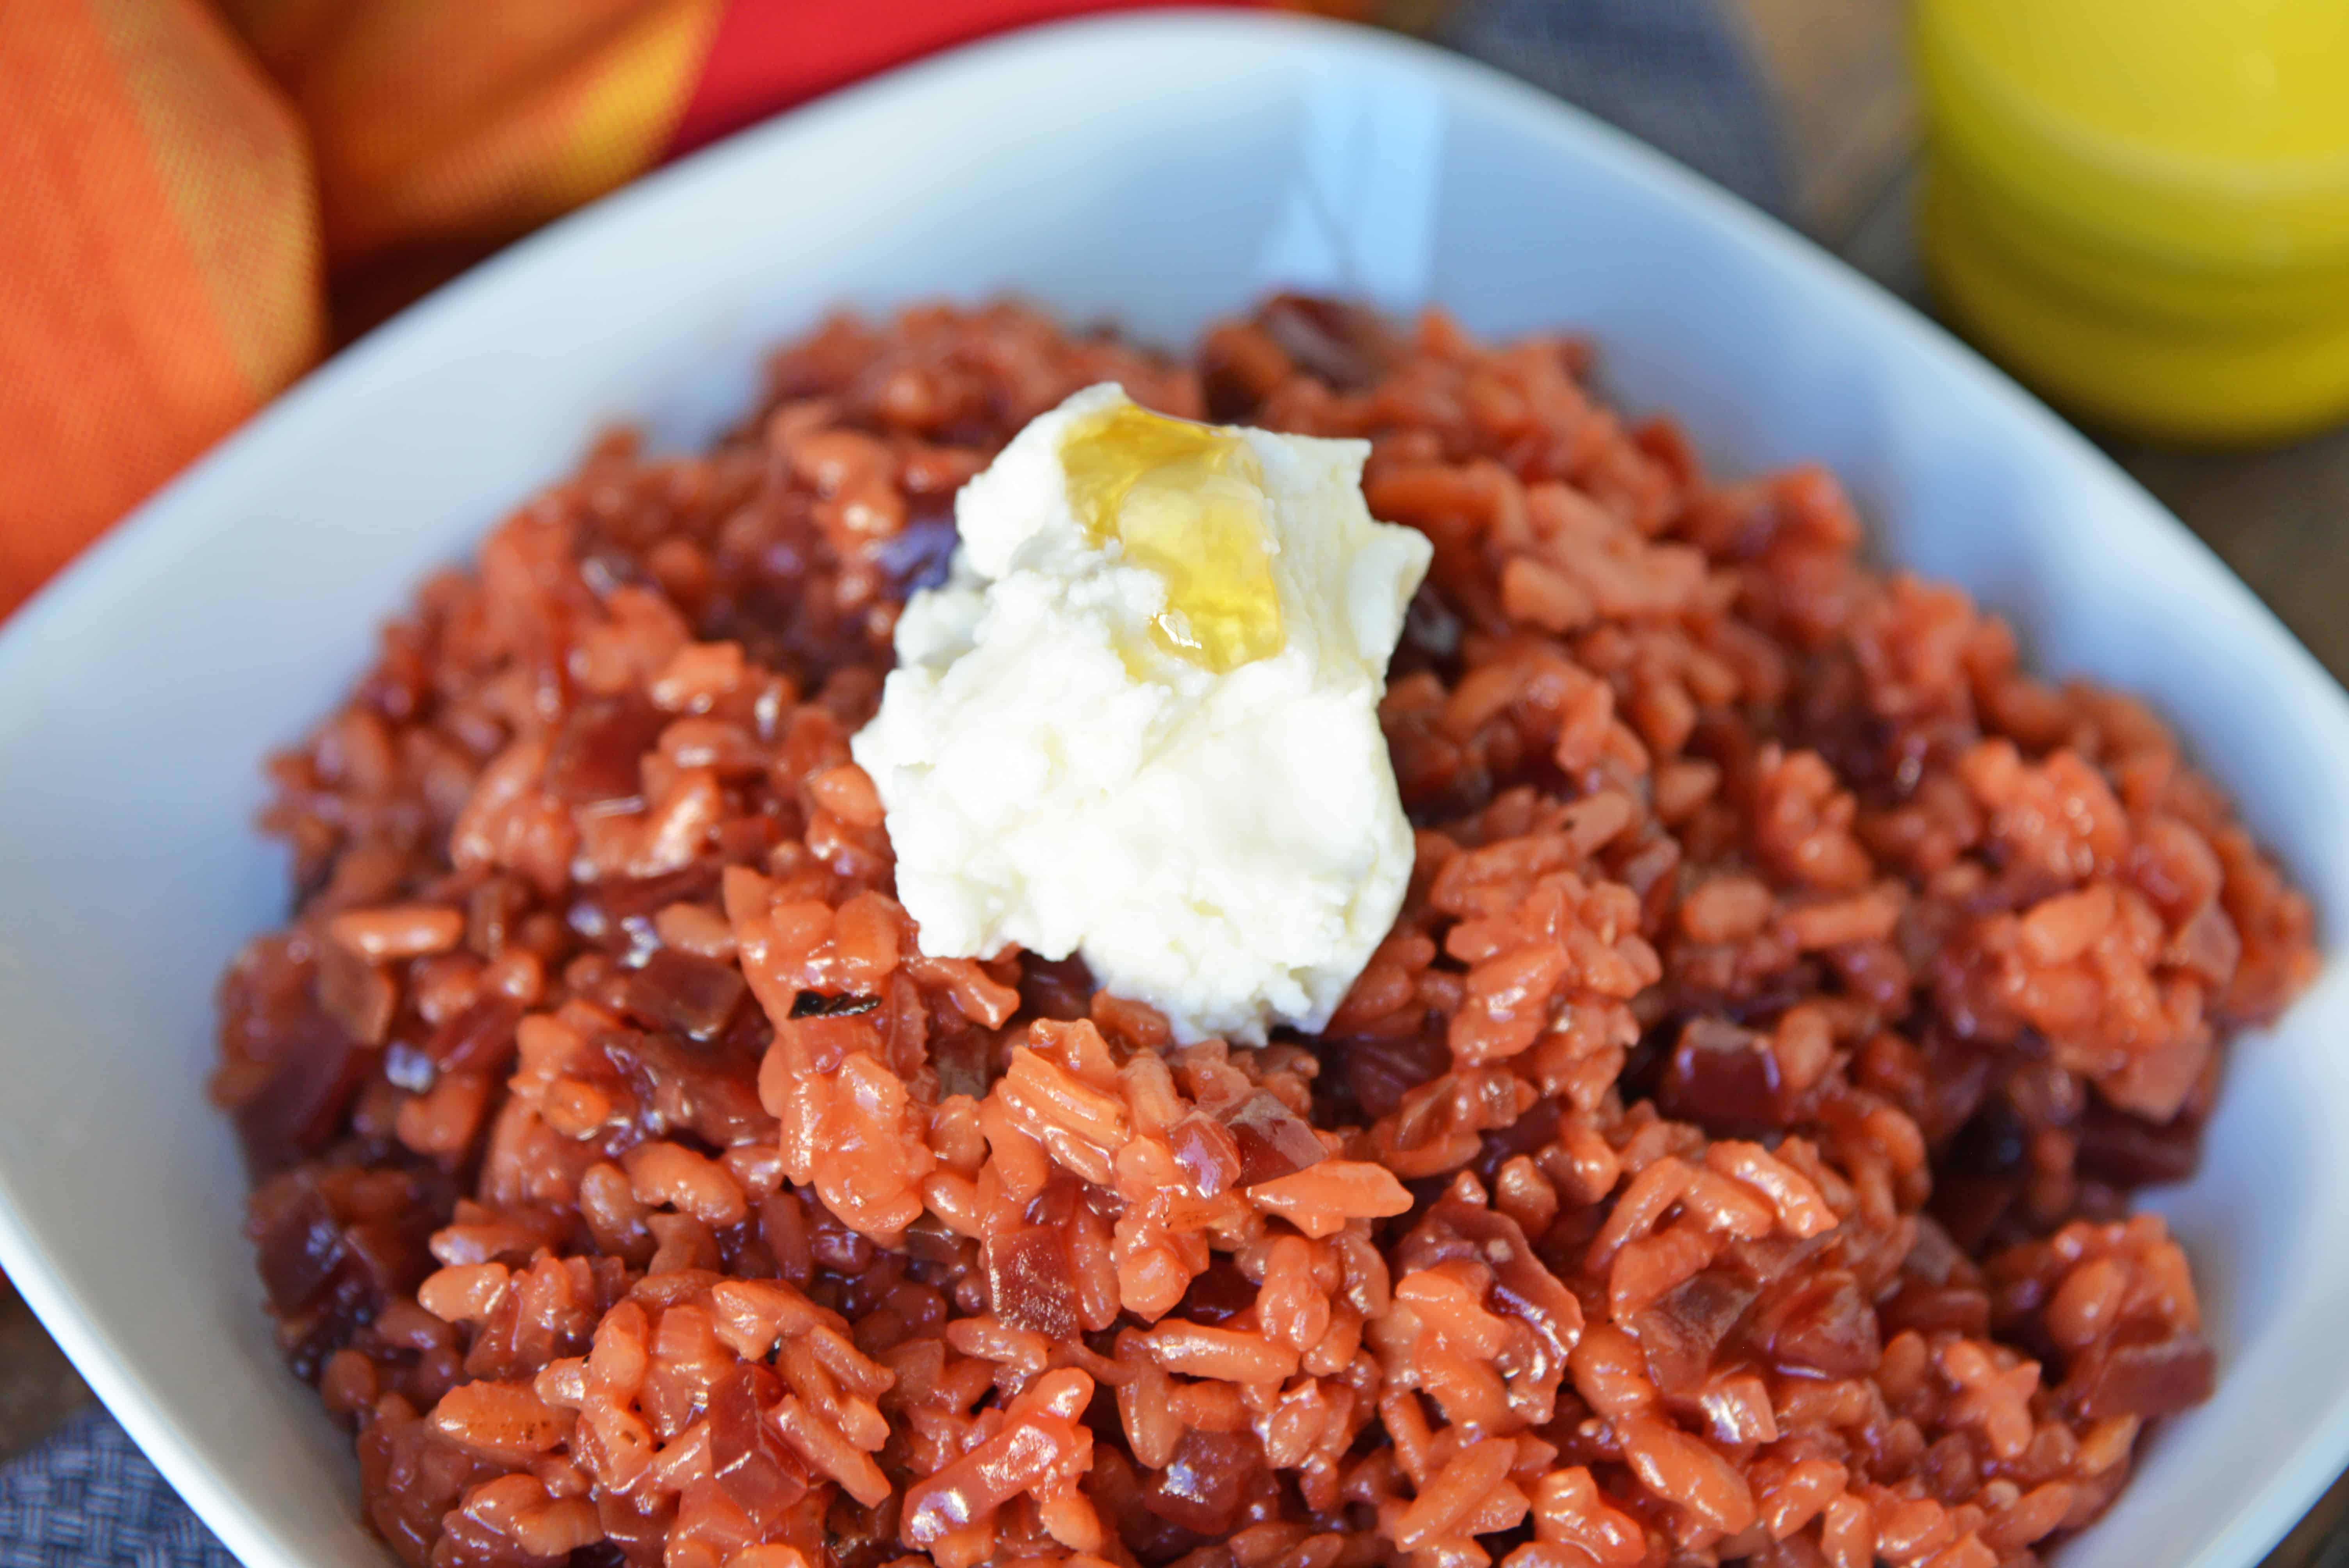 Beet Risotto is an easy risotto recipe that uses beets, shallots and garlic for a vibrant dish. Top with cool ricotta and honey. #beetrisotto #howtomakerisotto www.savoryexperiments.com 